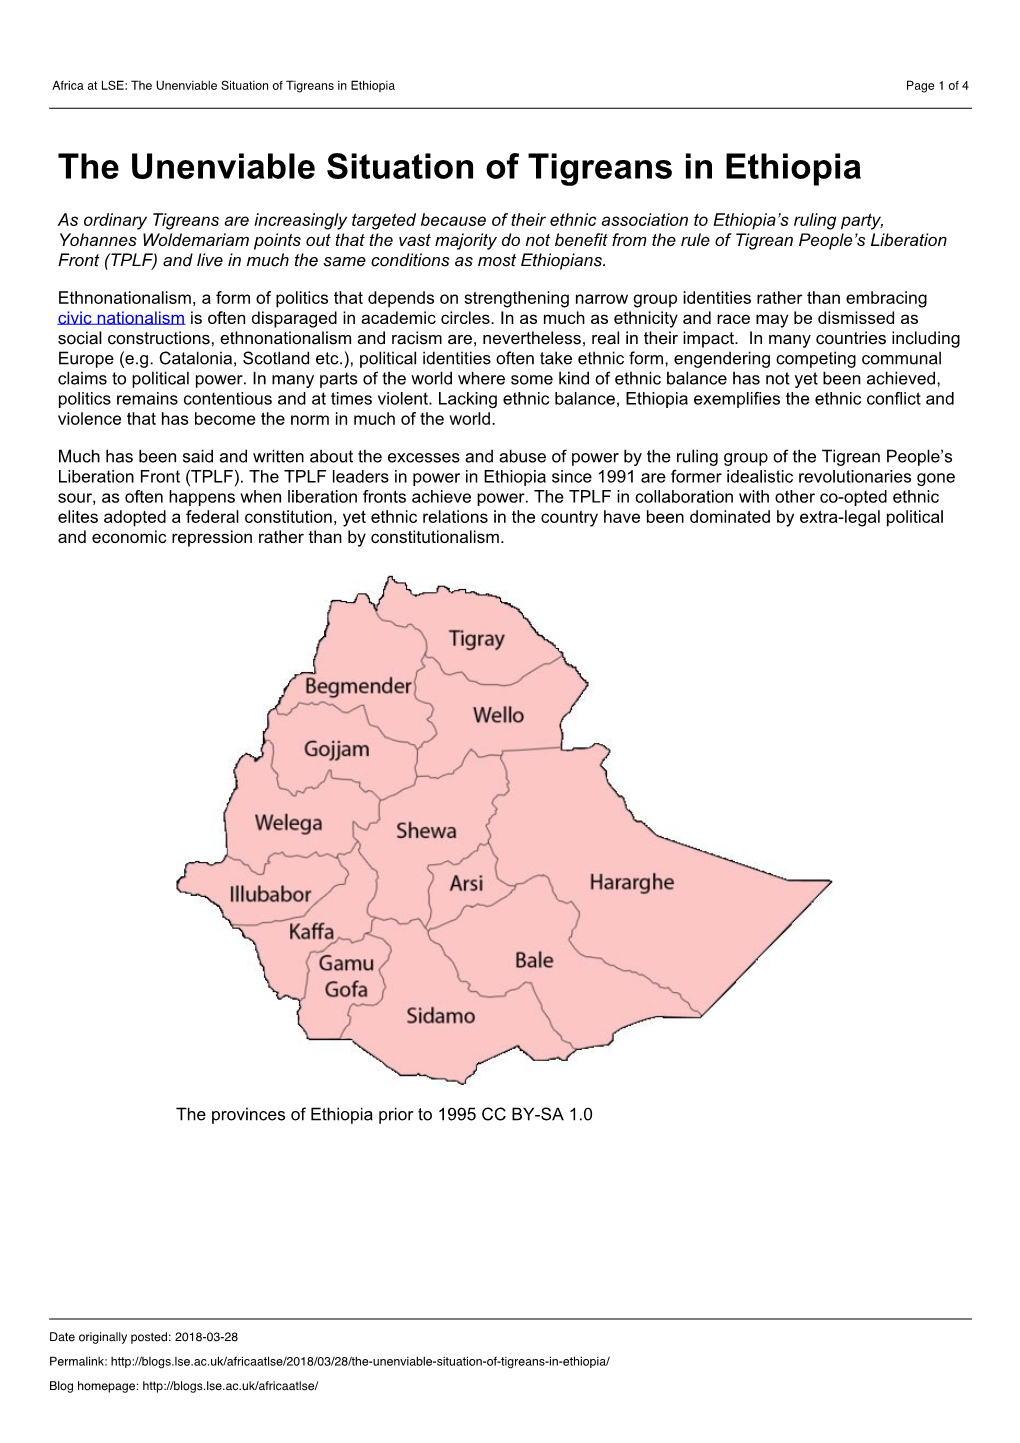 Africa at LSE: the Unenviable Situation of Tigreans in Ethiopia Page 1 of 4